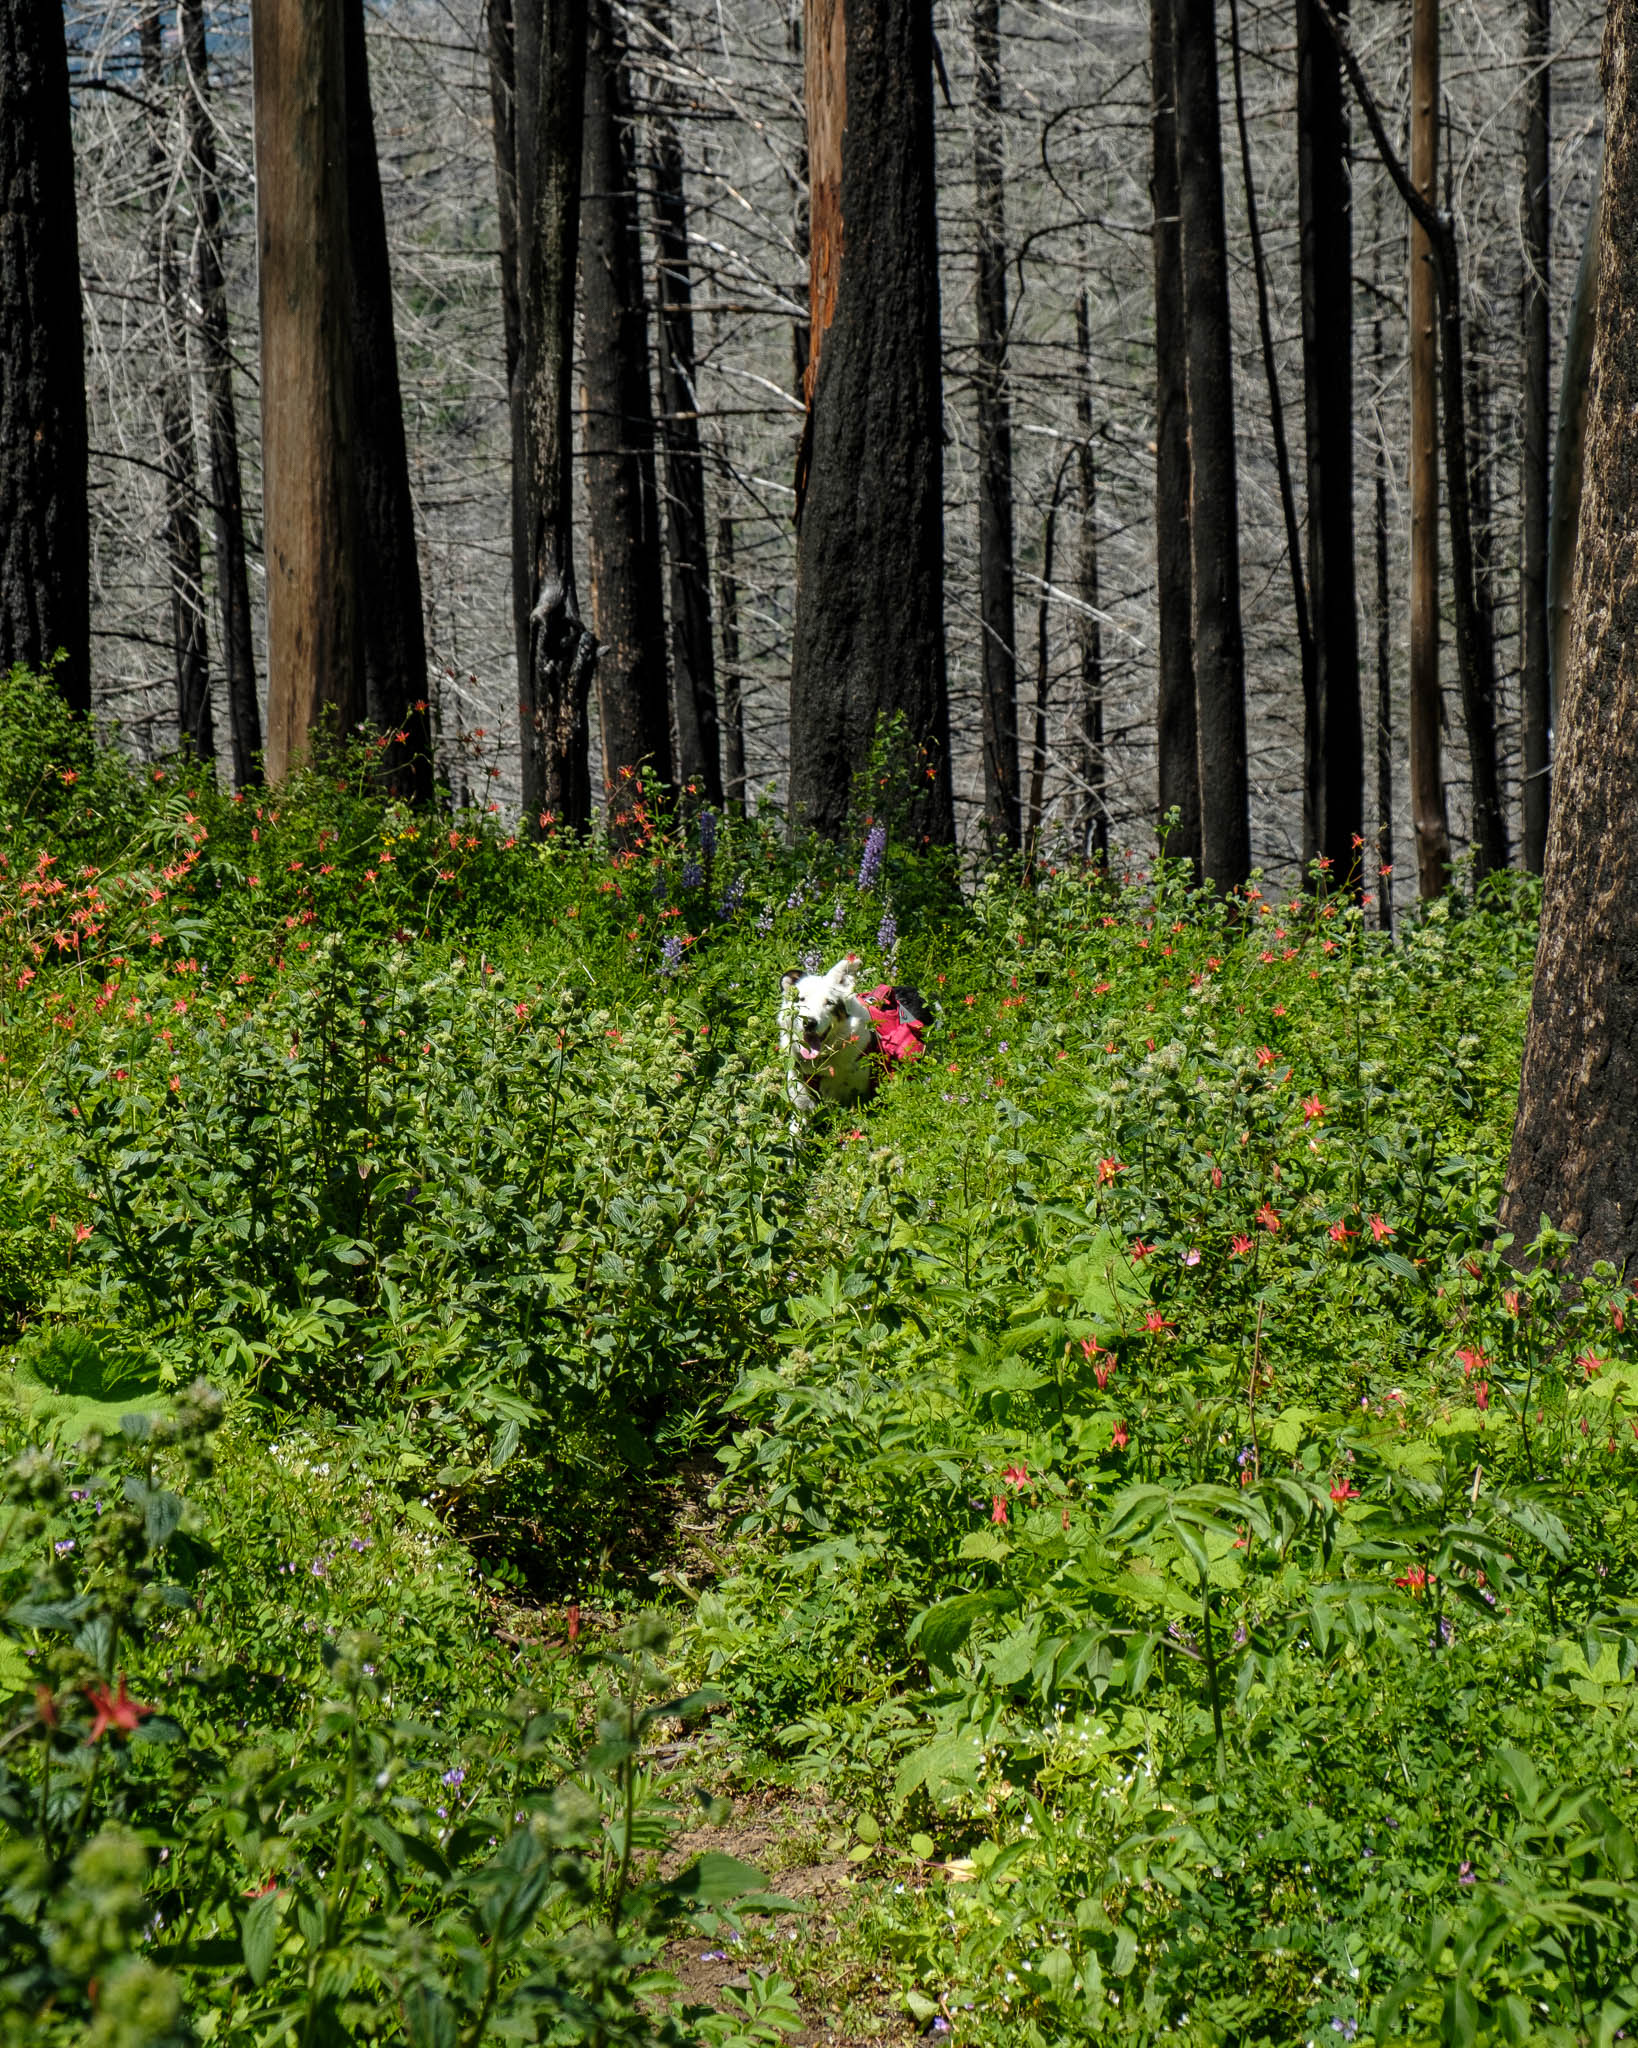 Reef runs through a patch of wildflowers growing amongst dead and scorched trees.